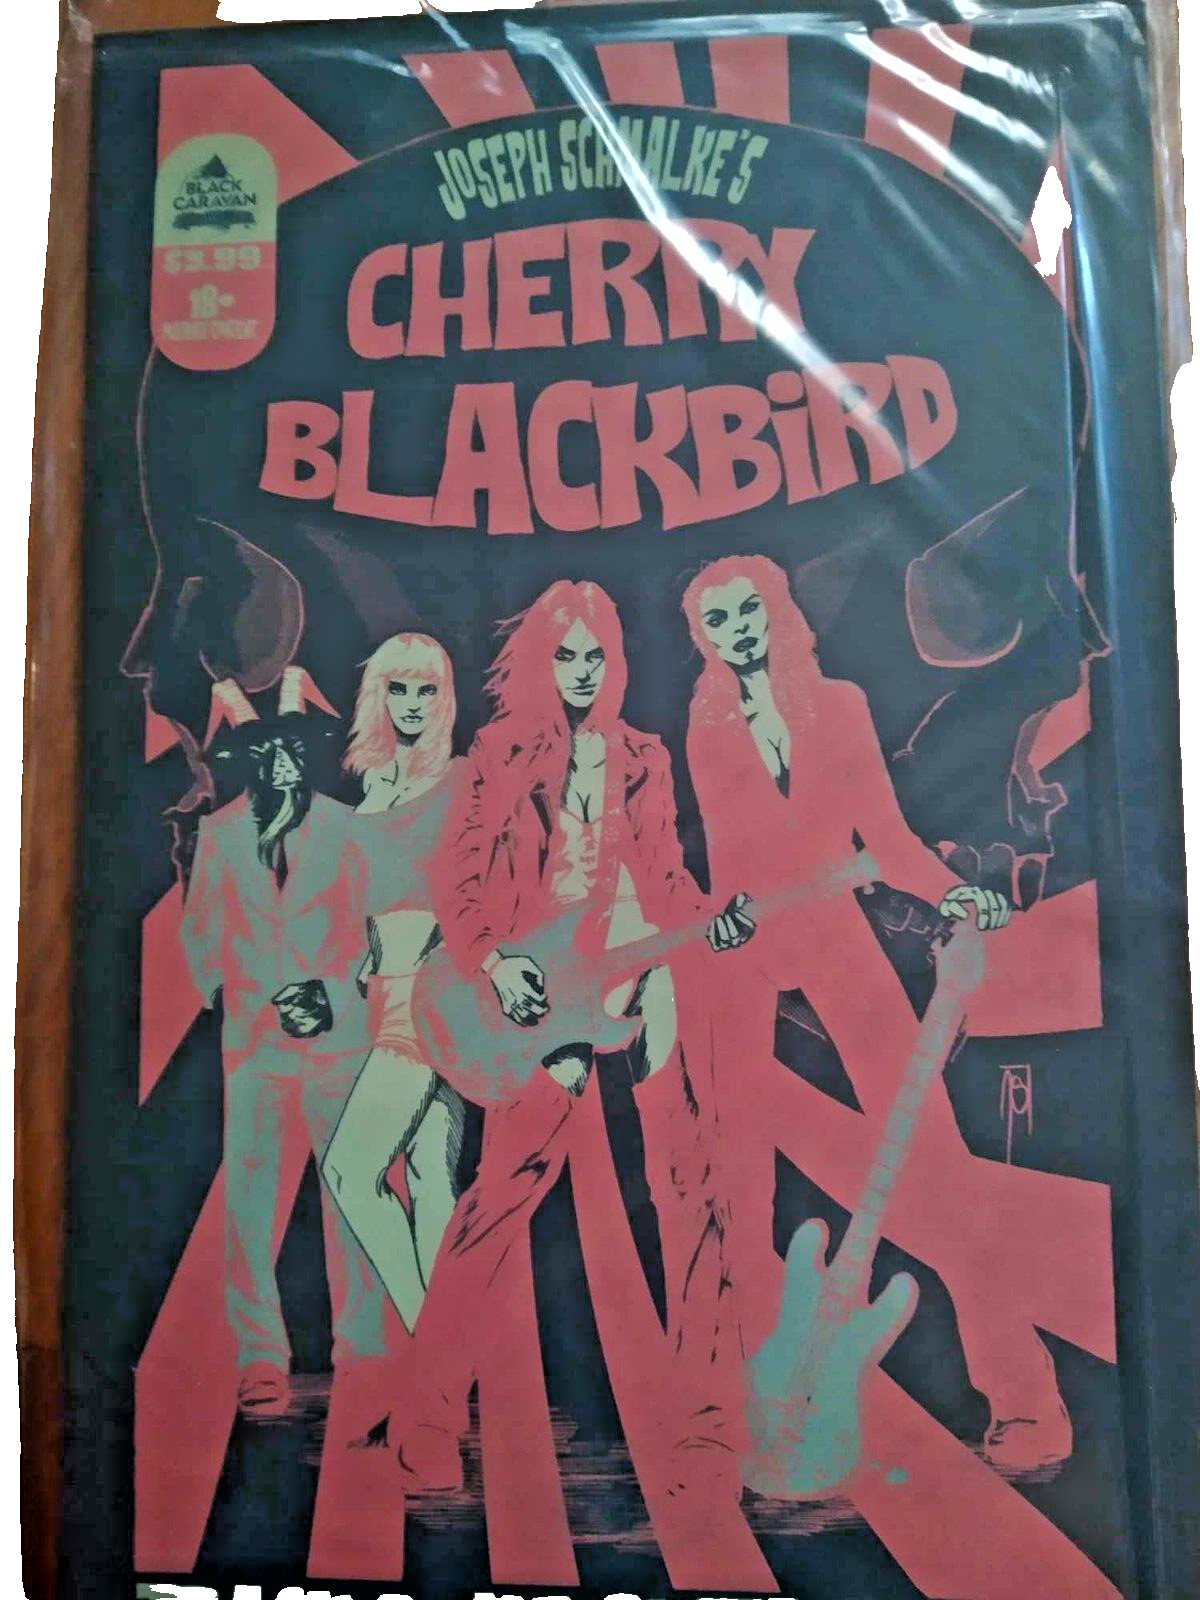 Cherry Blackbird #18 Scout Comics Me Gusta Cocaine sealed in bag